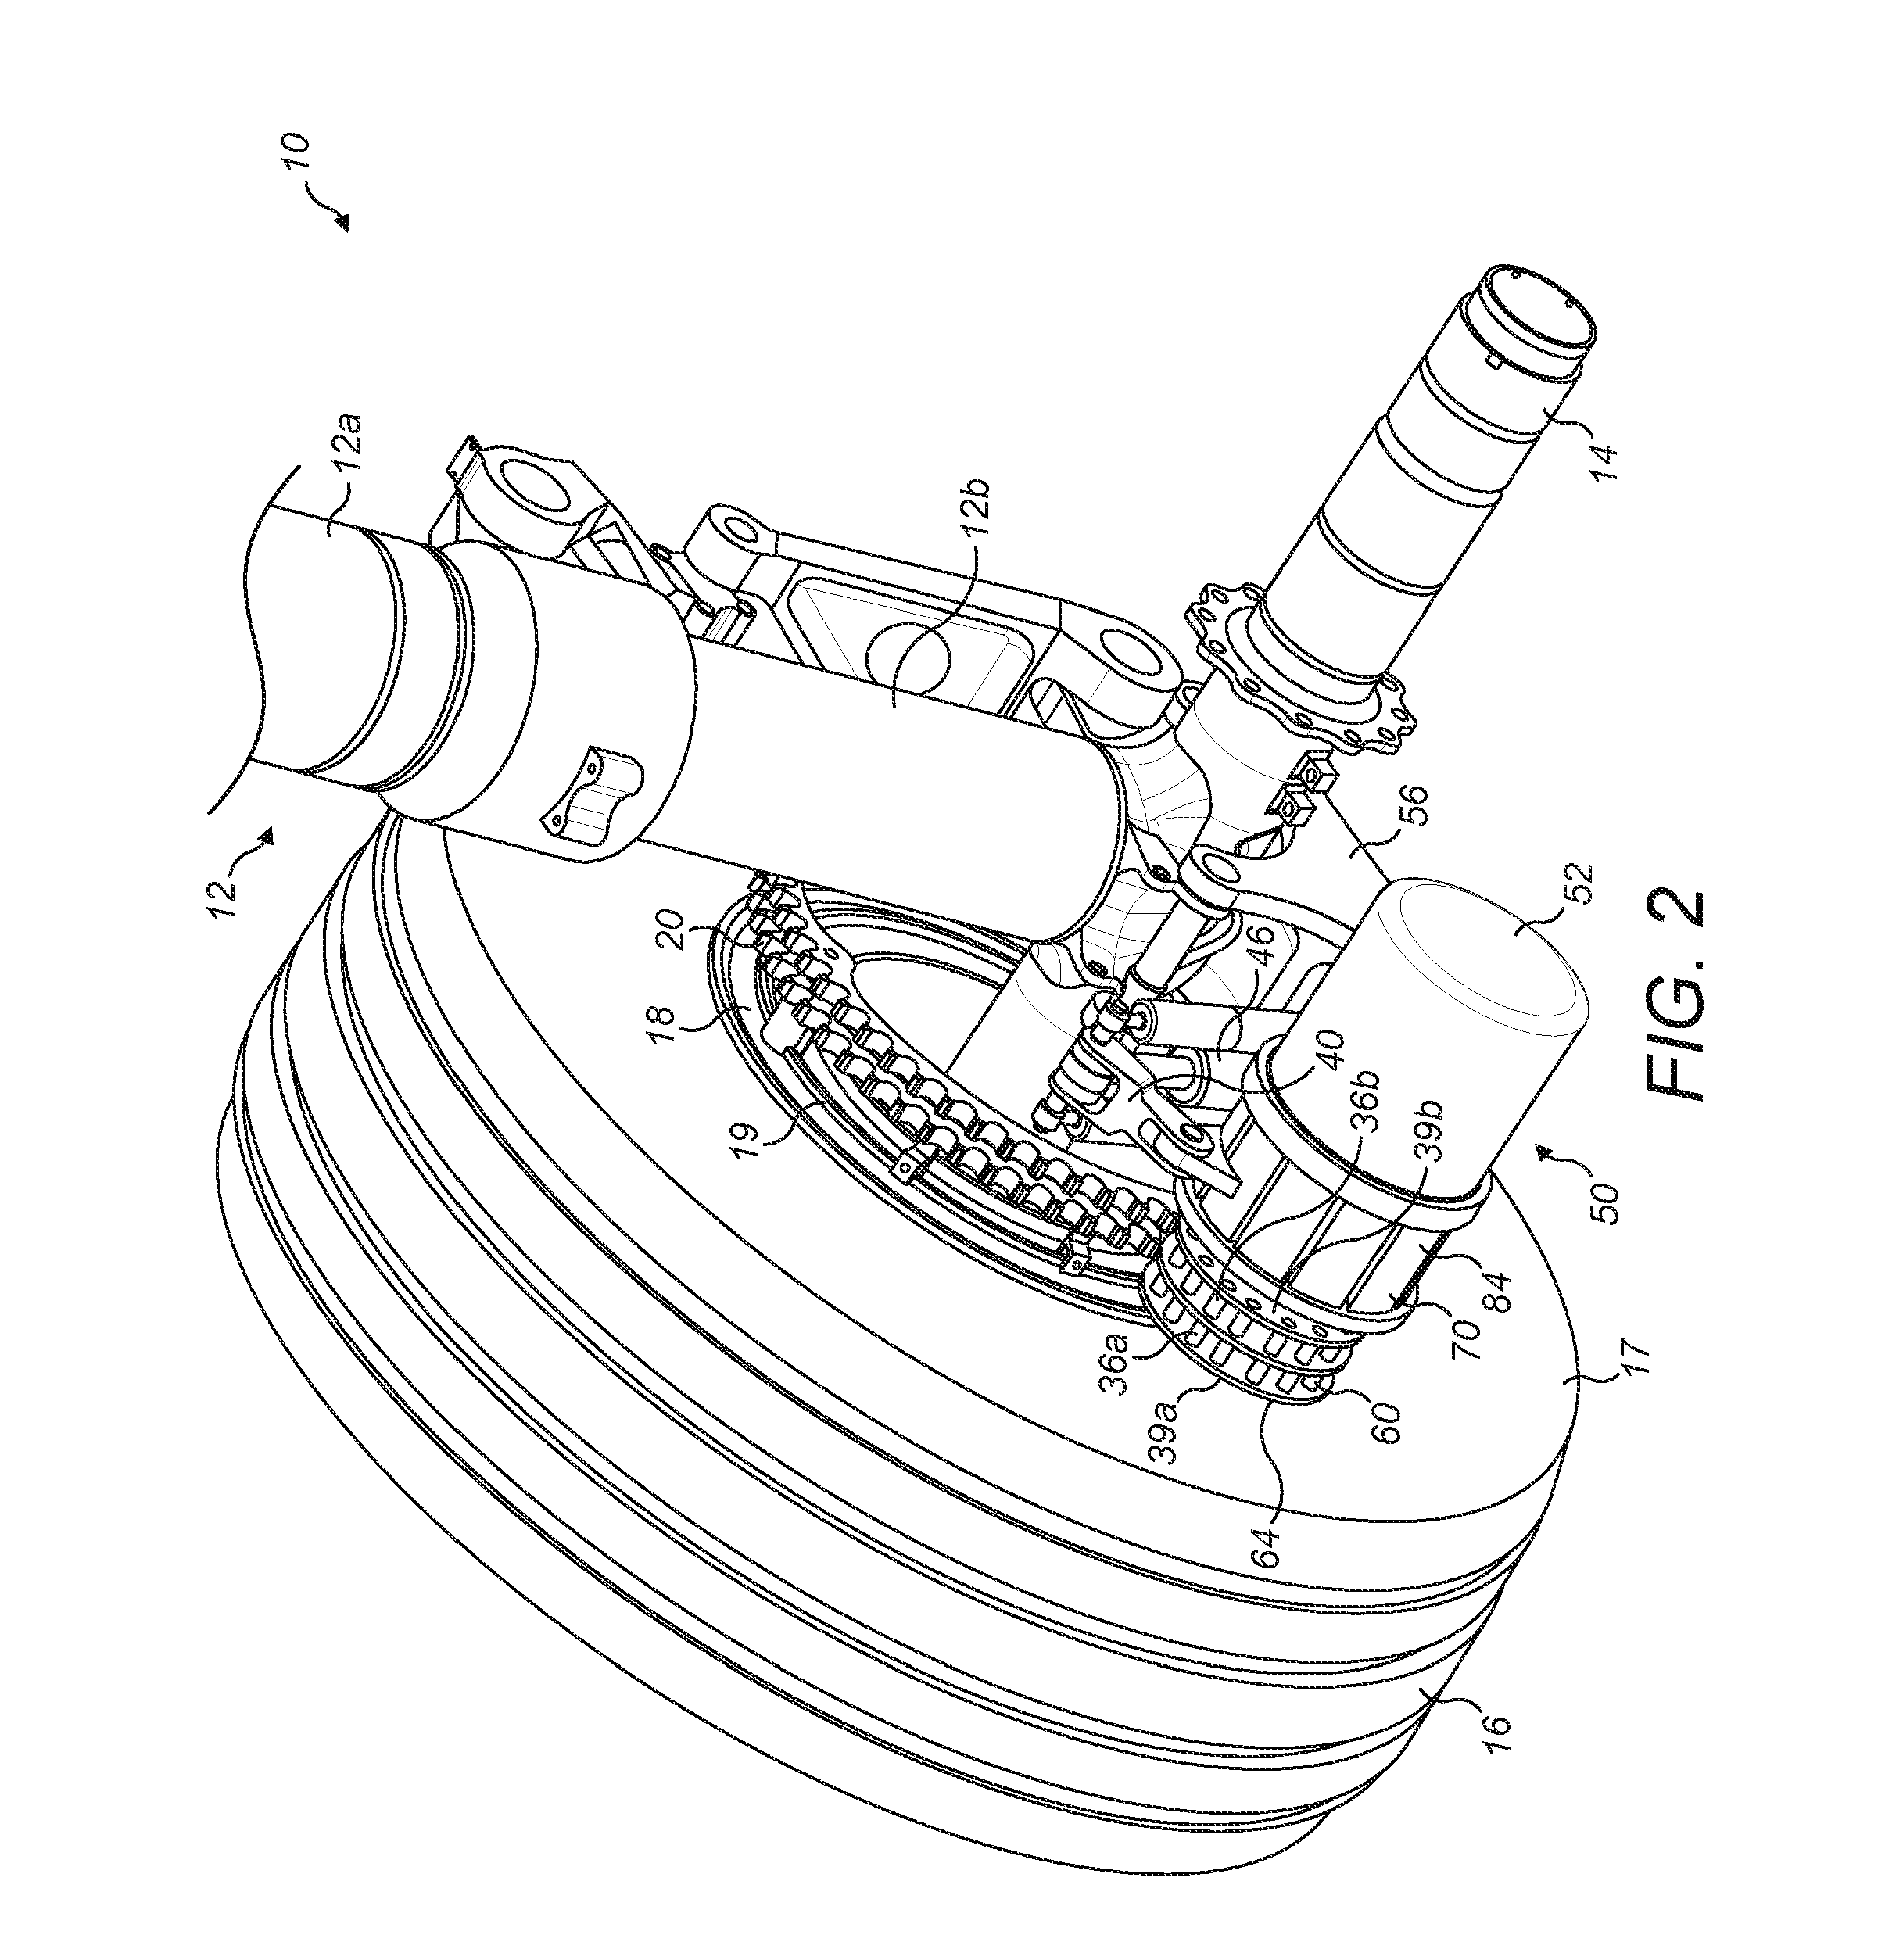 Drive system for landing gear